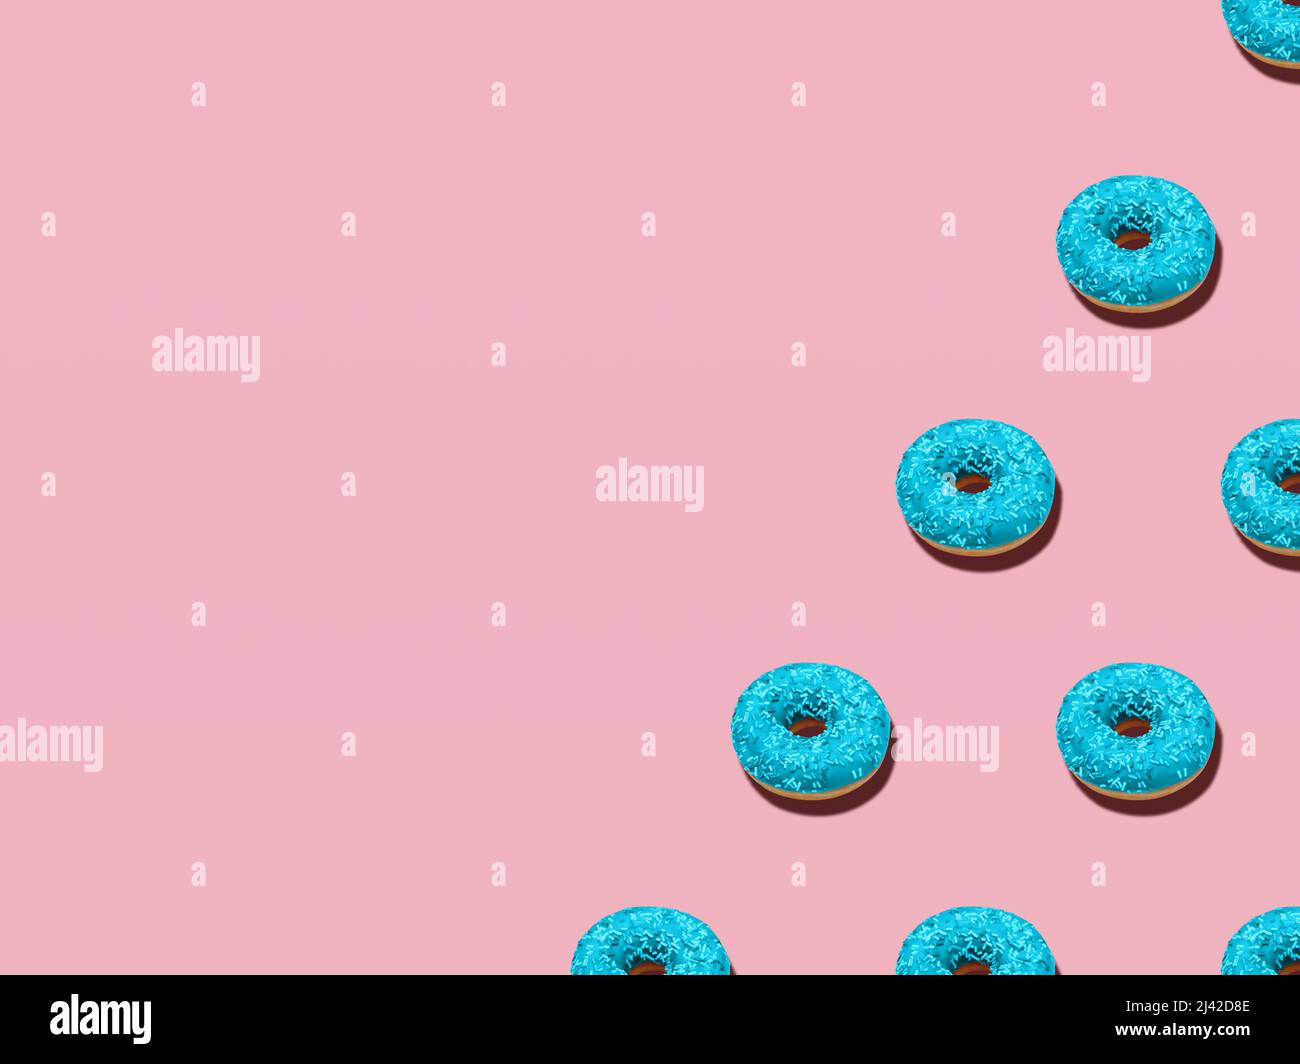 Colorful donuts. Photo with copy space. Stock Photo